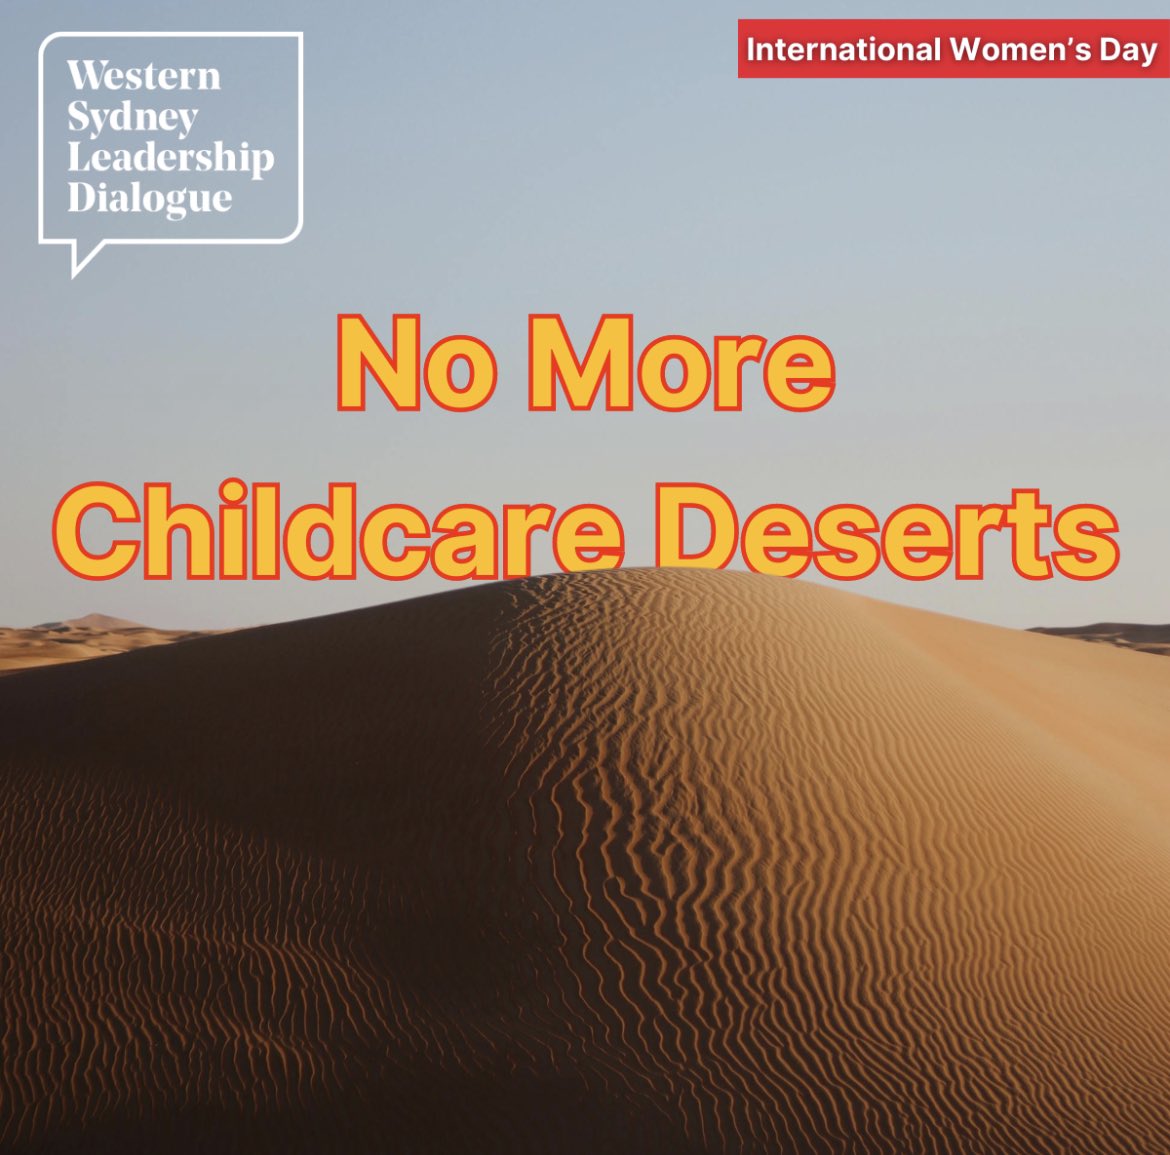 Childcare deserts are more prominent in Greater Western Sydney compared to the rest of Sydney, with many families in the region having less accessibility to childcare, limiting the ability of many parents, especially women, to participate in the workforce #IWD2024